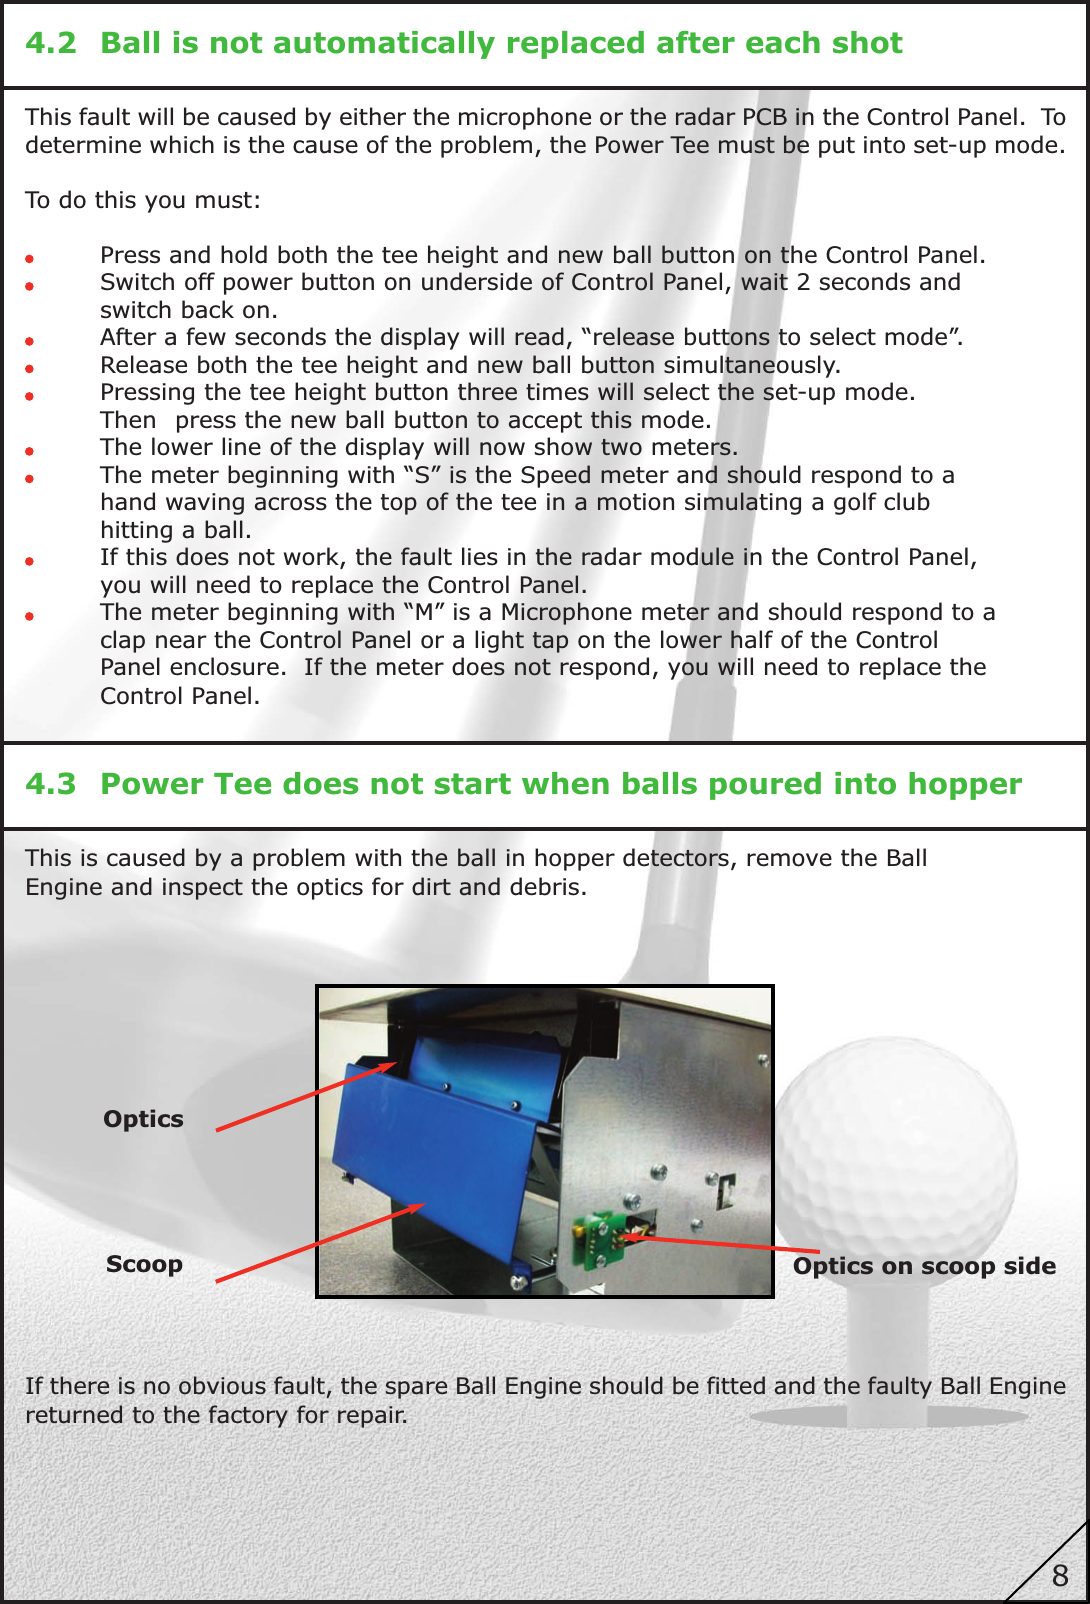 4.2 Ball is not automatically replaced after each shotThis fault will be caused by either the microphone or the radar PCB in the Control Panel. Todetermine which is the cause of the problem, the Power Tee must be put into set-up mode.To do this you must:Press and hold both the tee height and new ball button on the Control Panel.Switch off power button on underside of Control Panel, wait 2 seconds andswitch back on.After a few seconds the display will read, “release buttons to select mode”.Release both the tee height and new ball button simultaneously.Pressing the tee height button three times will select the set-up mode.Then press the new ball button to accept this mode.The lower line of the display will now show two meters.The meter beginning with “S” is the Speed meter and should respond to ahand waving across the top of the tee in a motion simulating a golf clubhitting a ball.If this does not work, the fault lies in the radar module in the Control Panel,you will need to replace the Control Panel.The meter beginning with “M” is a Microphone meter and should respond to aclap near the Control Panel or a light tap on the lower half of the ControlPanel enclosure. If the meter does not respond, you will need to replace theControl Panel.4.3 Power Tee does not start when balls poured into hopperThis is caused by a problem with the ball in hopper detectors, remove the BallEngine and inspect the optics for dirt and debris.If there is no obvious fault, the spare Ball Engine should be fitted and the faulty Ball Enginereturned to the factory for repair.OpticsOptics on scoop sideScoop8